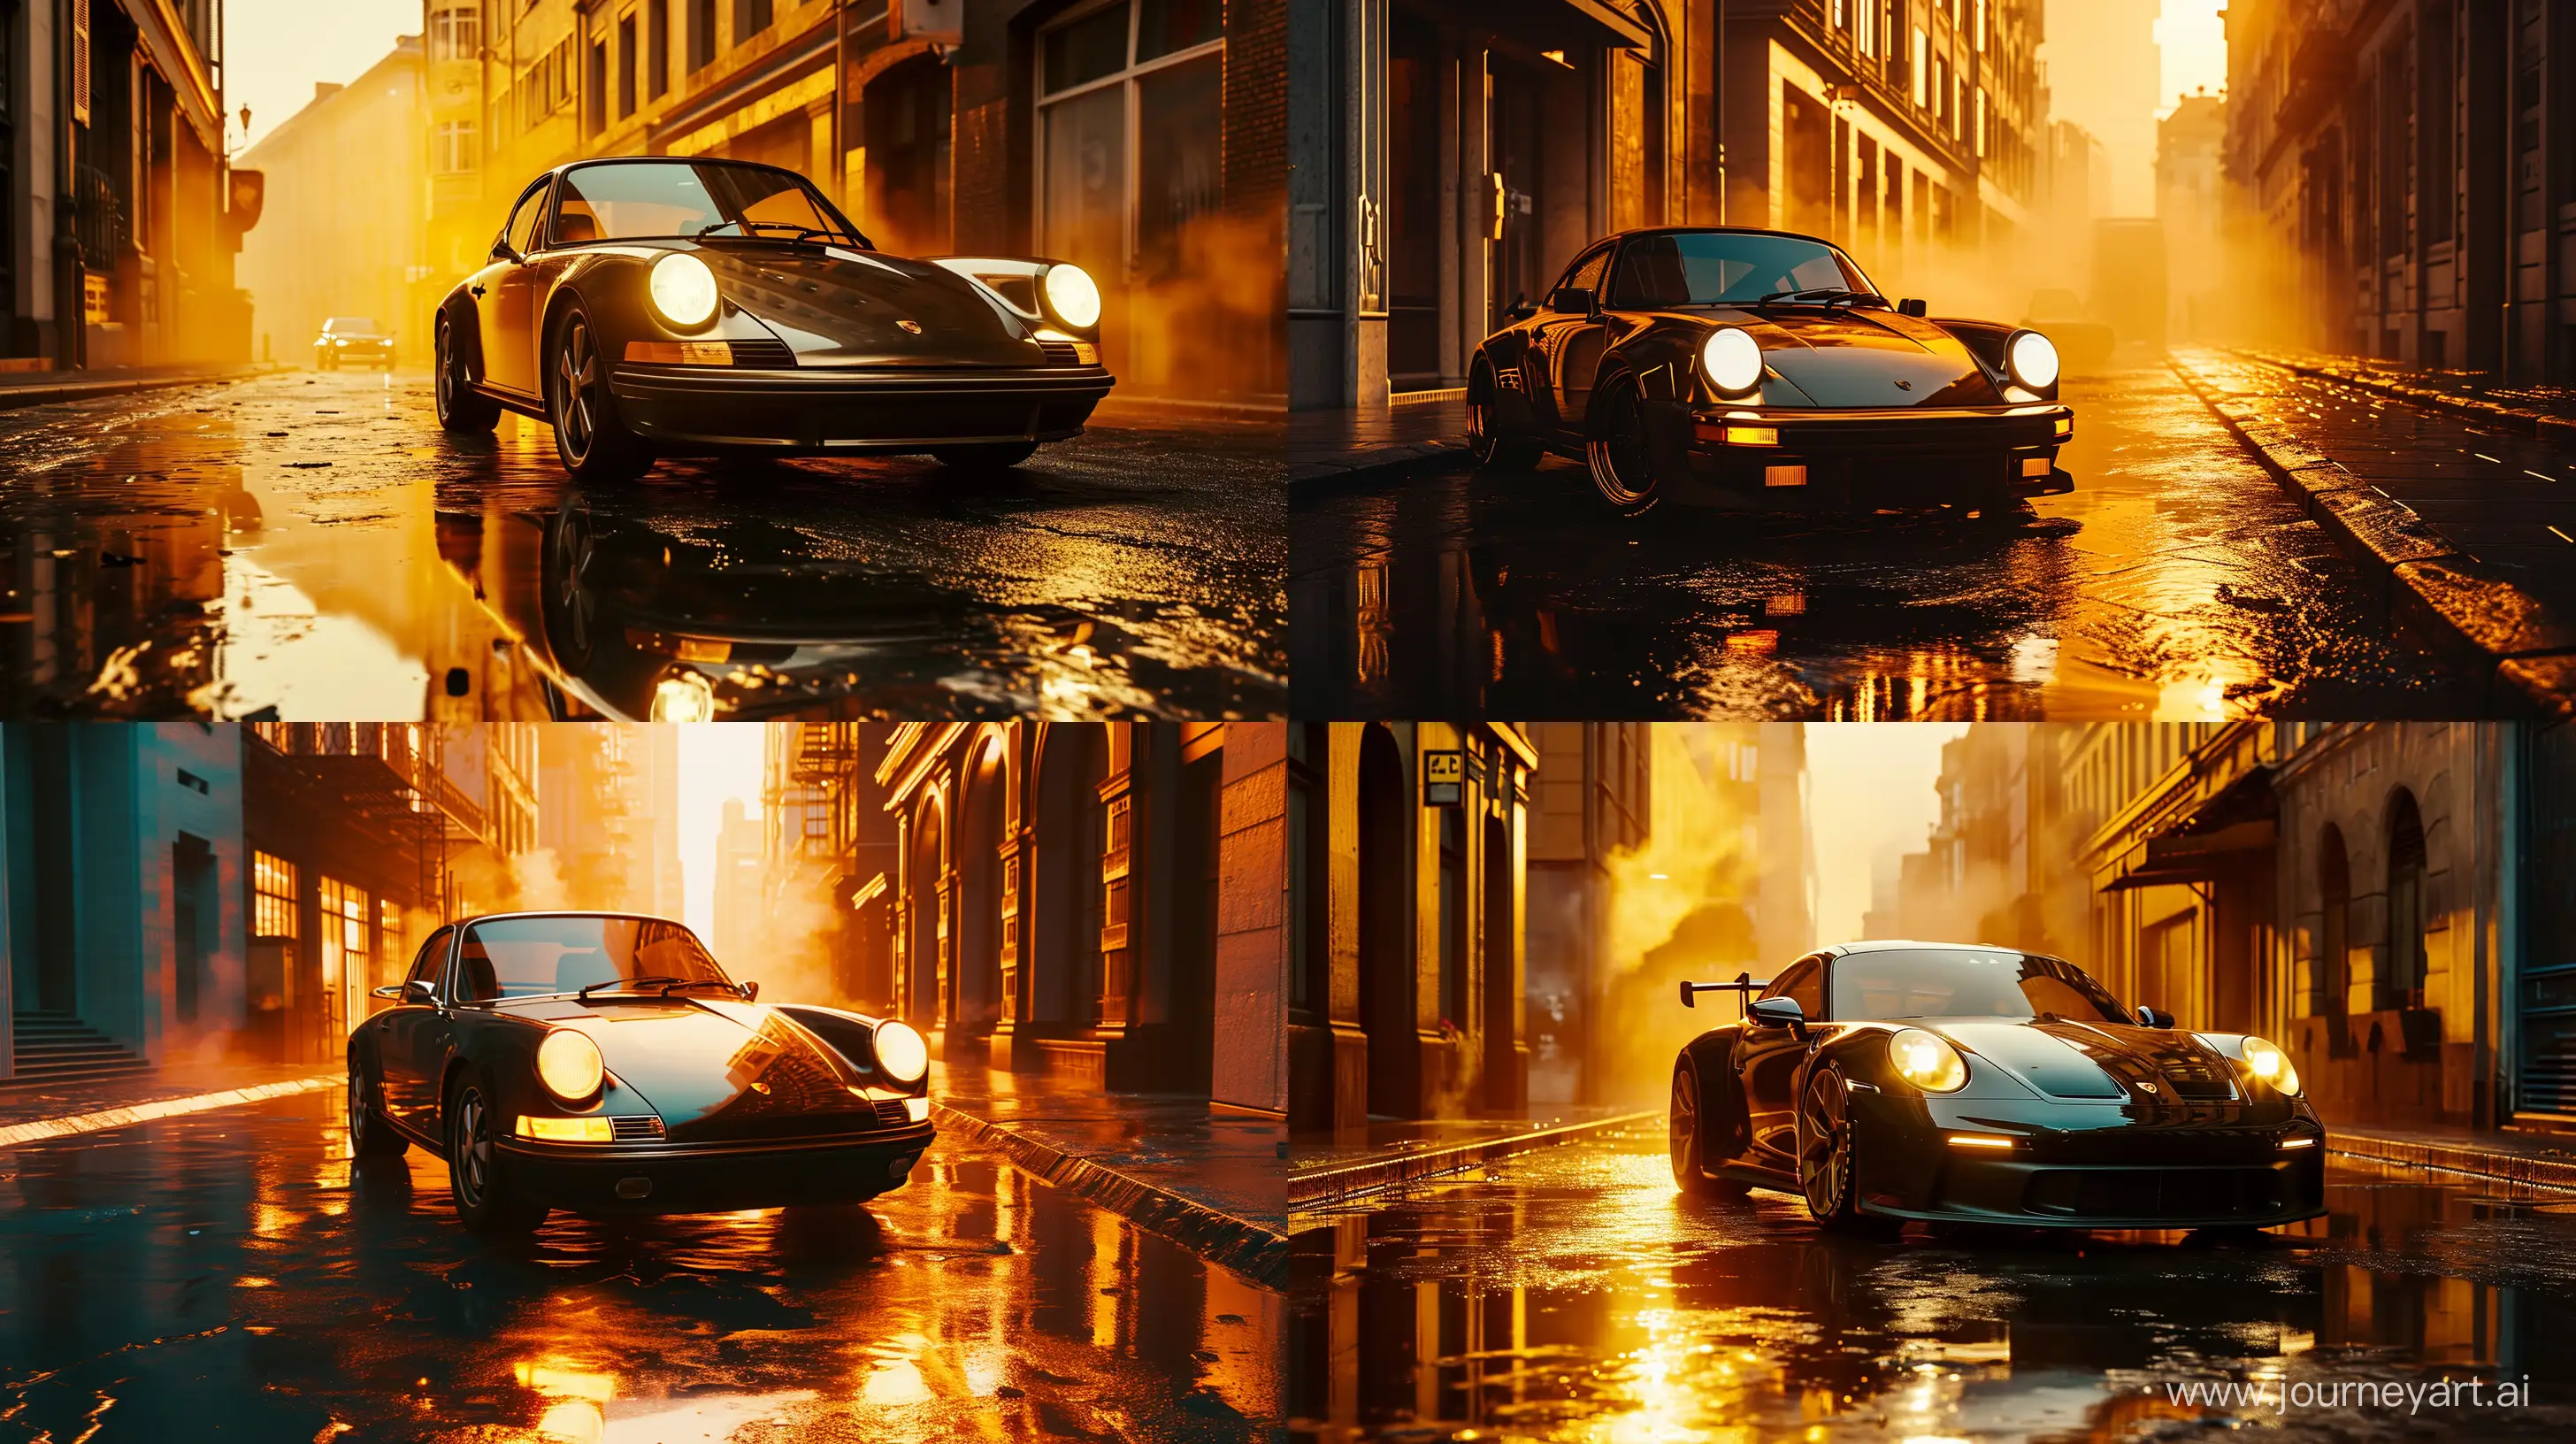 Drone view of a sleek,  Porsche parked on a wet street, illuminated by the golden hues of the rising or setting sun. The car’s headlights are on, casting an intense glow that contrasts with its dark body. Reflections of buildings and the sky are visible on the car’s shiny surface. The street is wet, possibly from recent rain, and reflects the warm sunlight, creating an atmospheric mood. There is mist or smoke in the background, adding to the dramatic effect of the scene. An urban environment with tall buildings on both sides of the street. --v 6.0 --ar 16:9